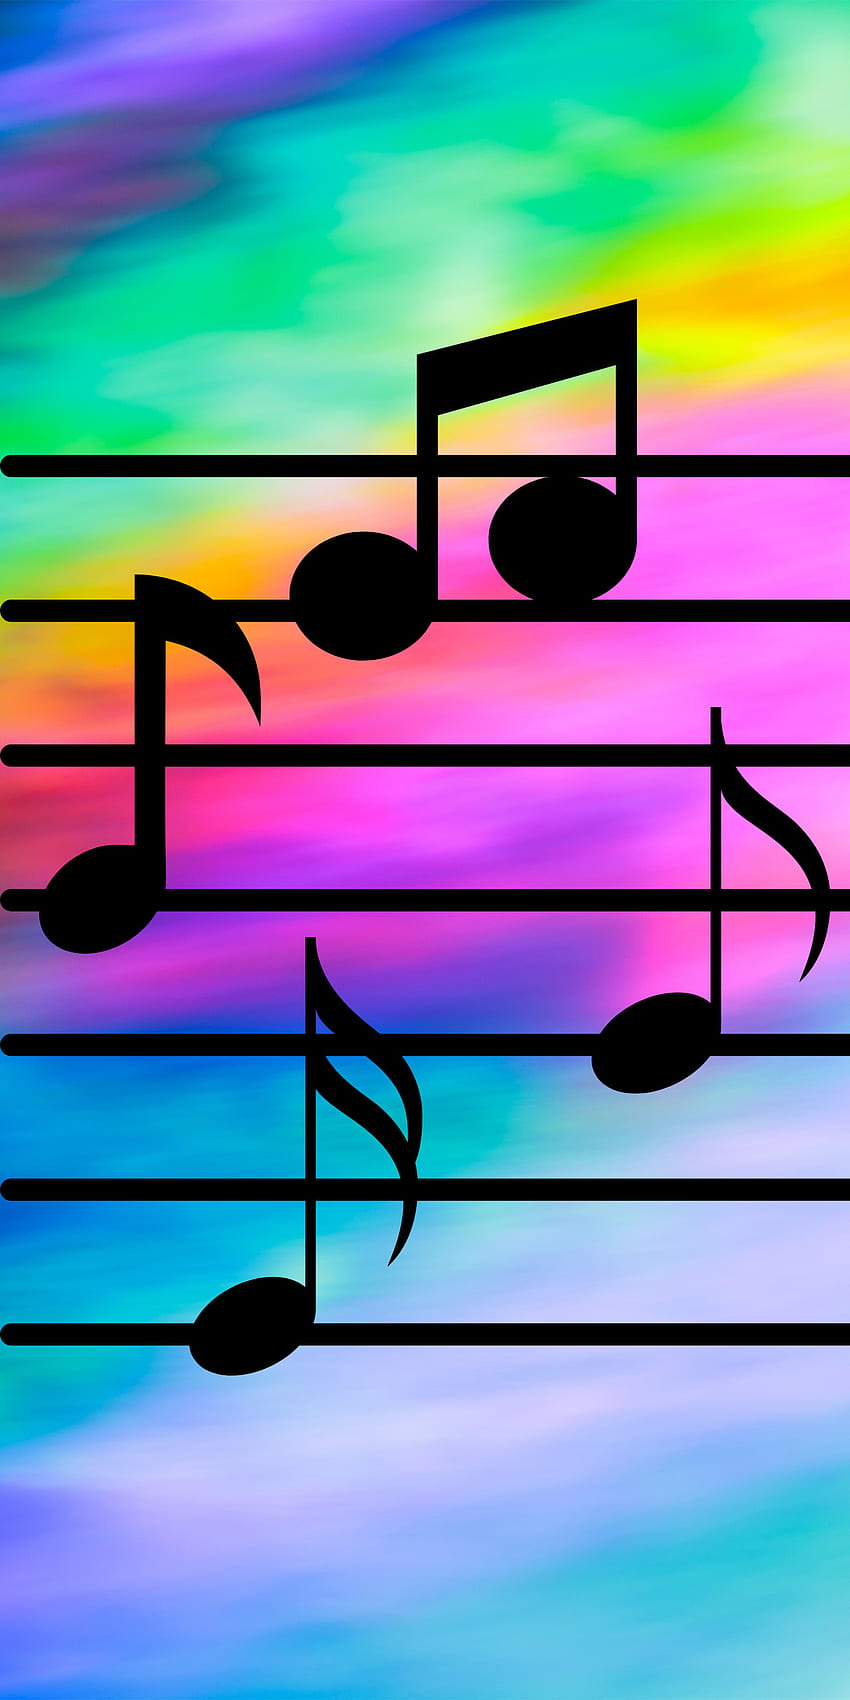 Colorful Musical Notes With Background RoyaltyFree Stock Image   Storyblocks